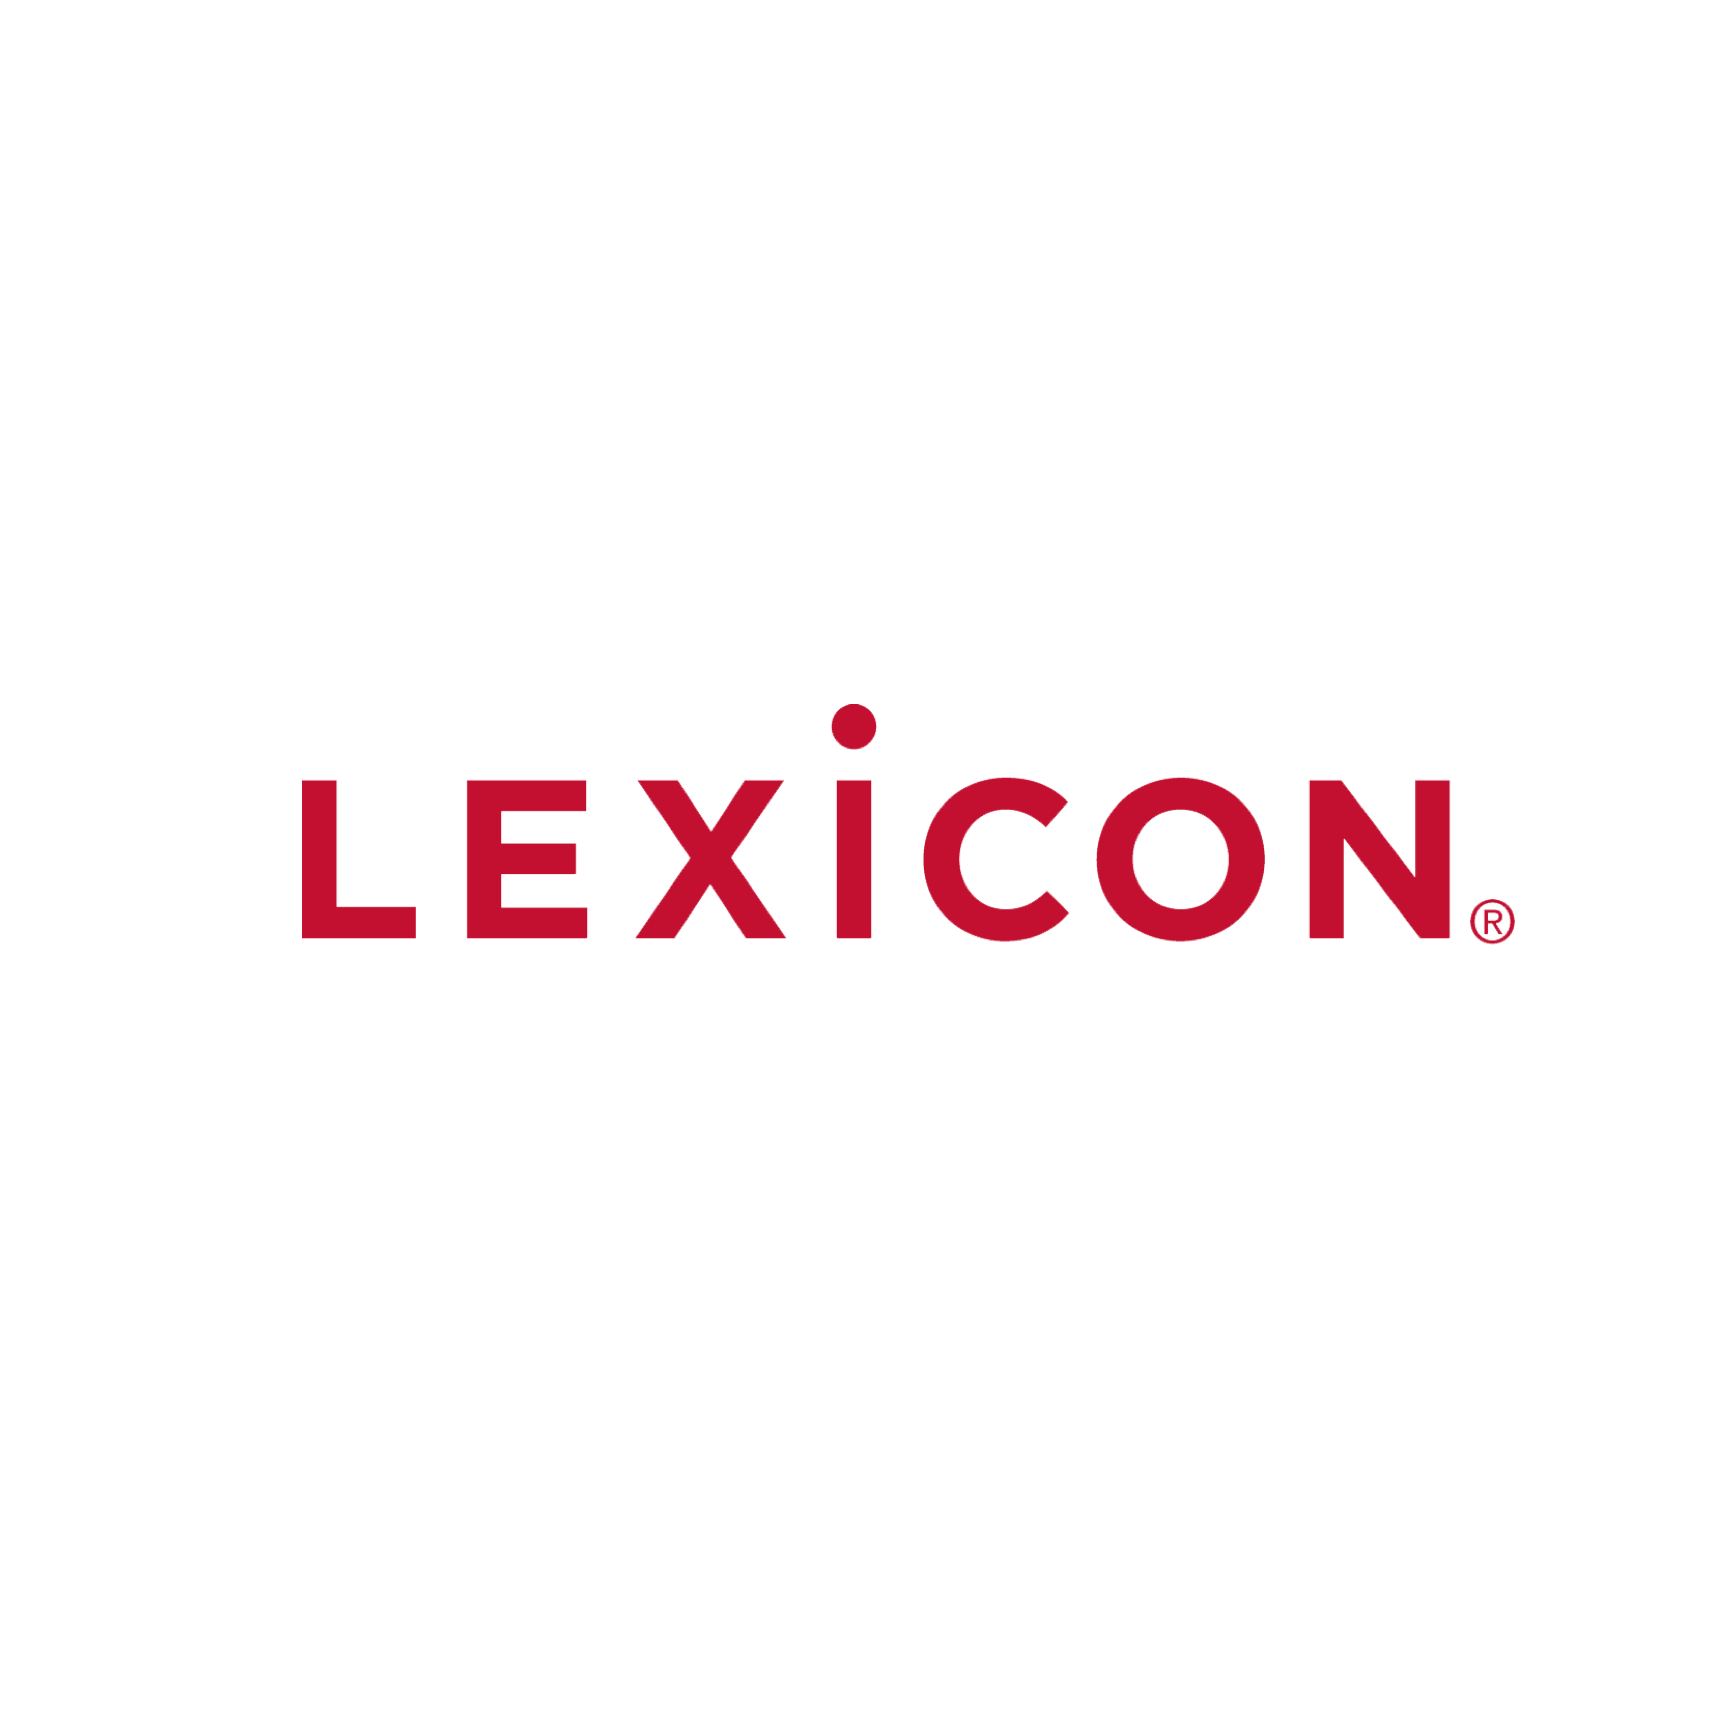 Lexicon Branding profile on Qualified.One